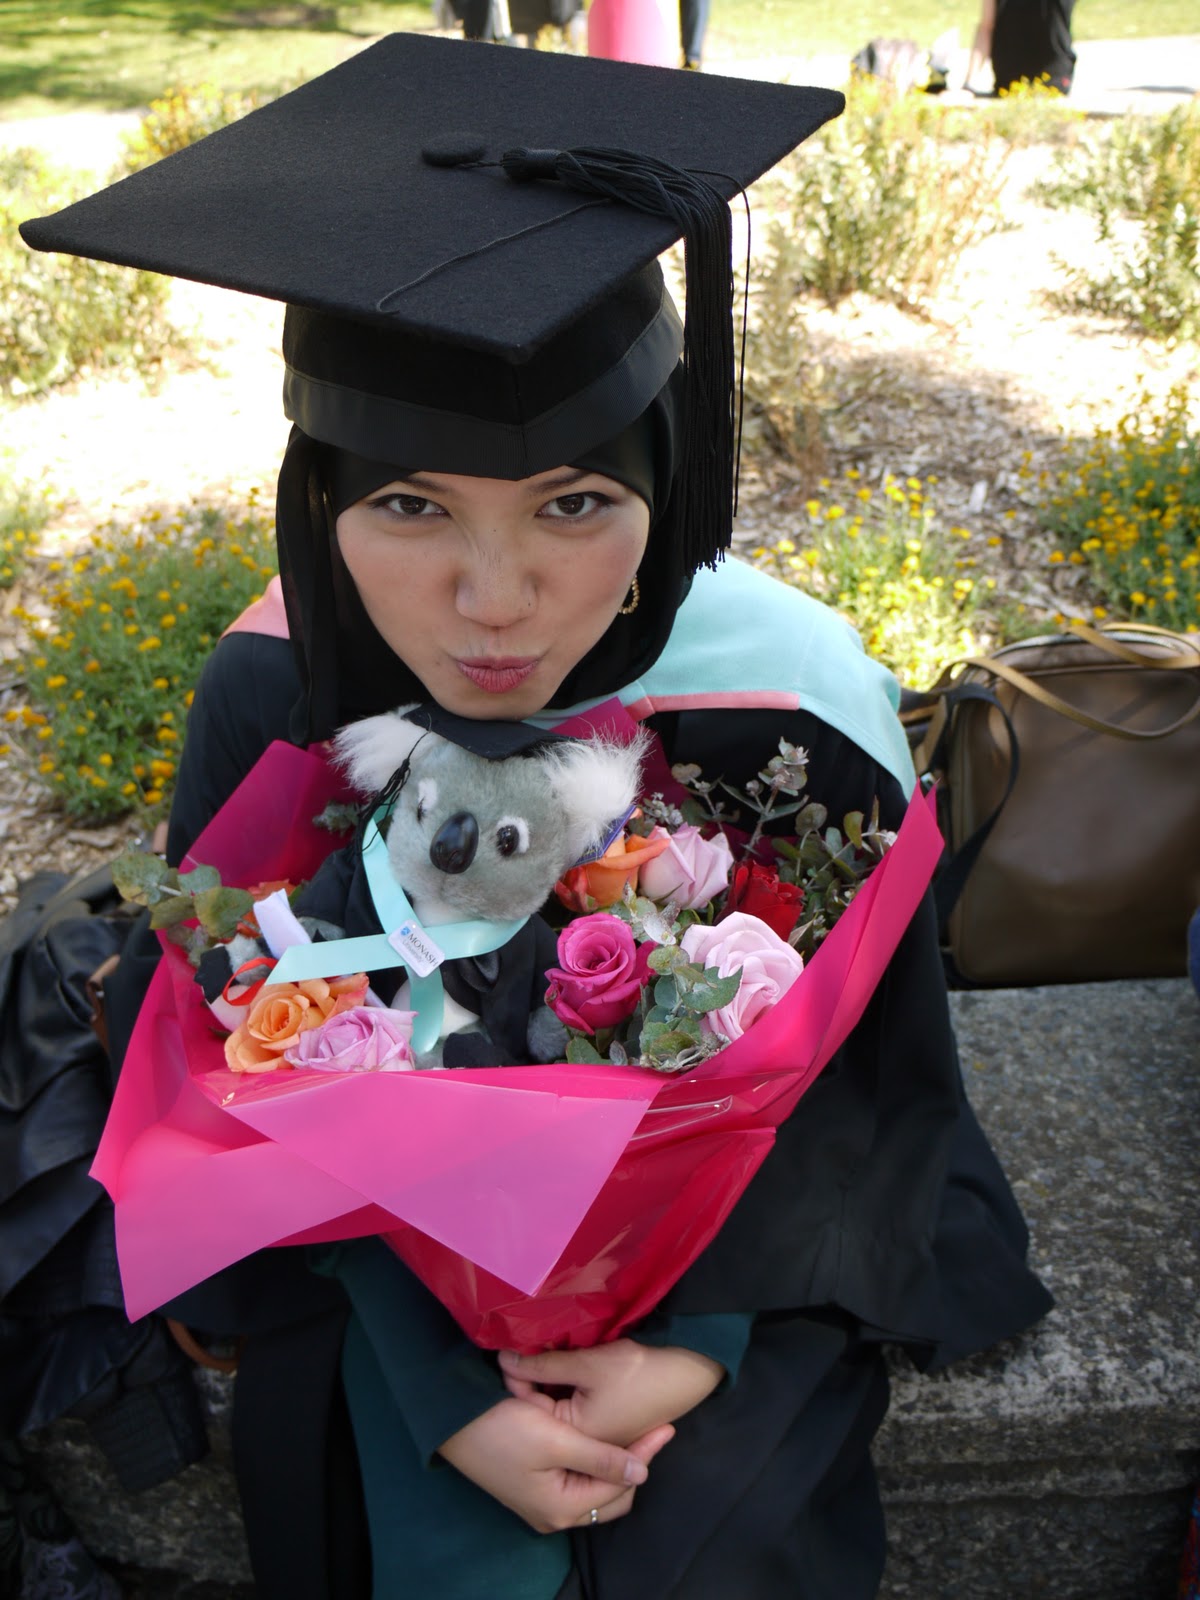 The Awesome Project Far Hijab And Graduation Tips